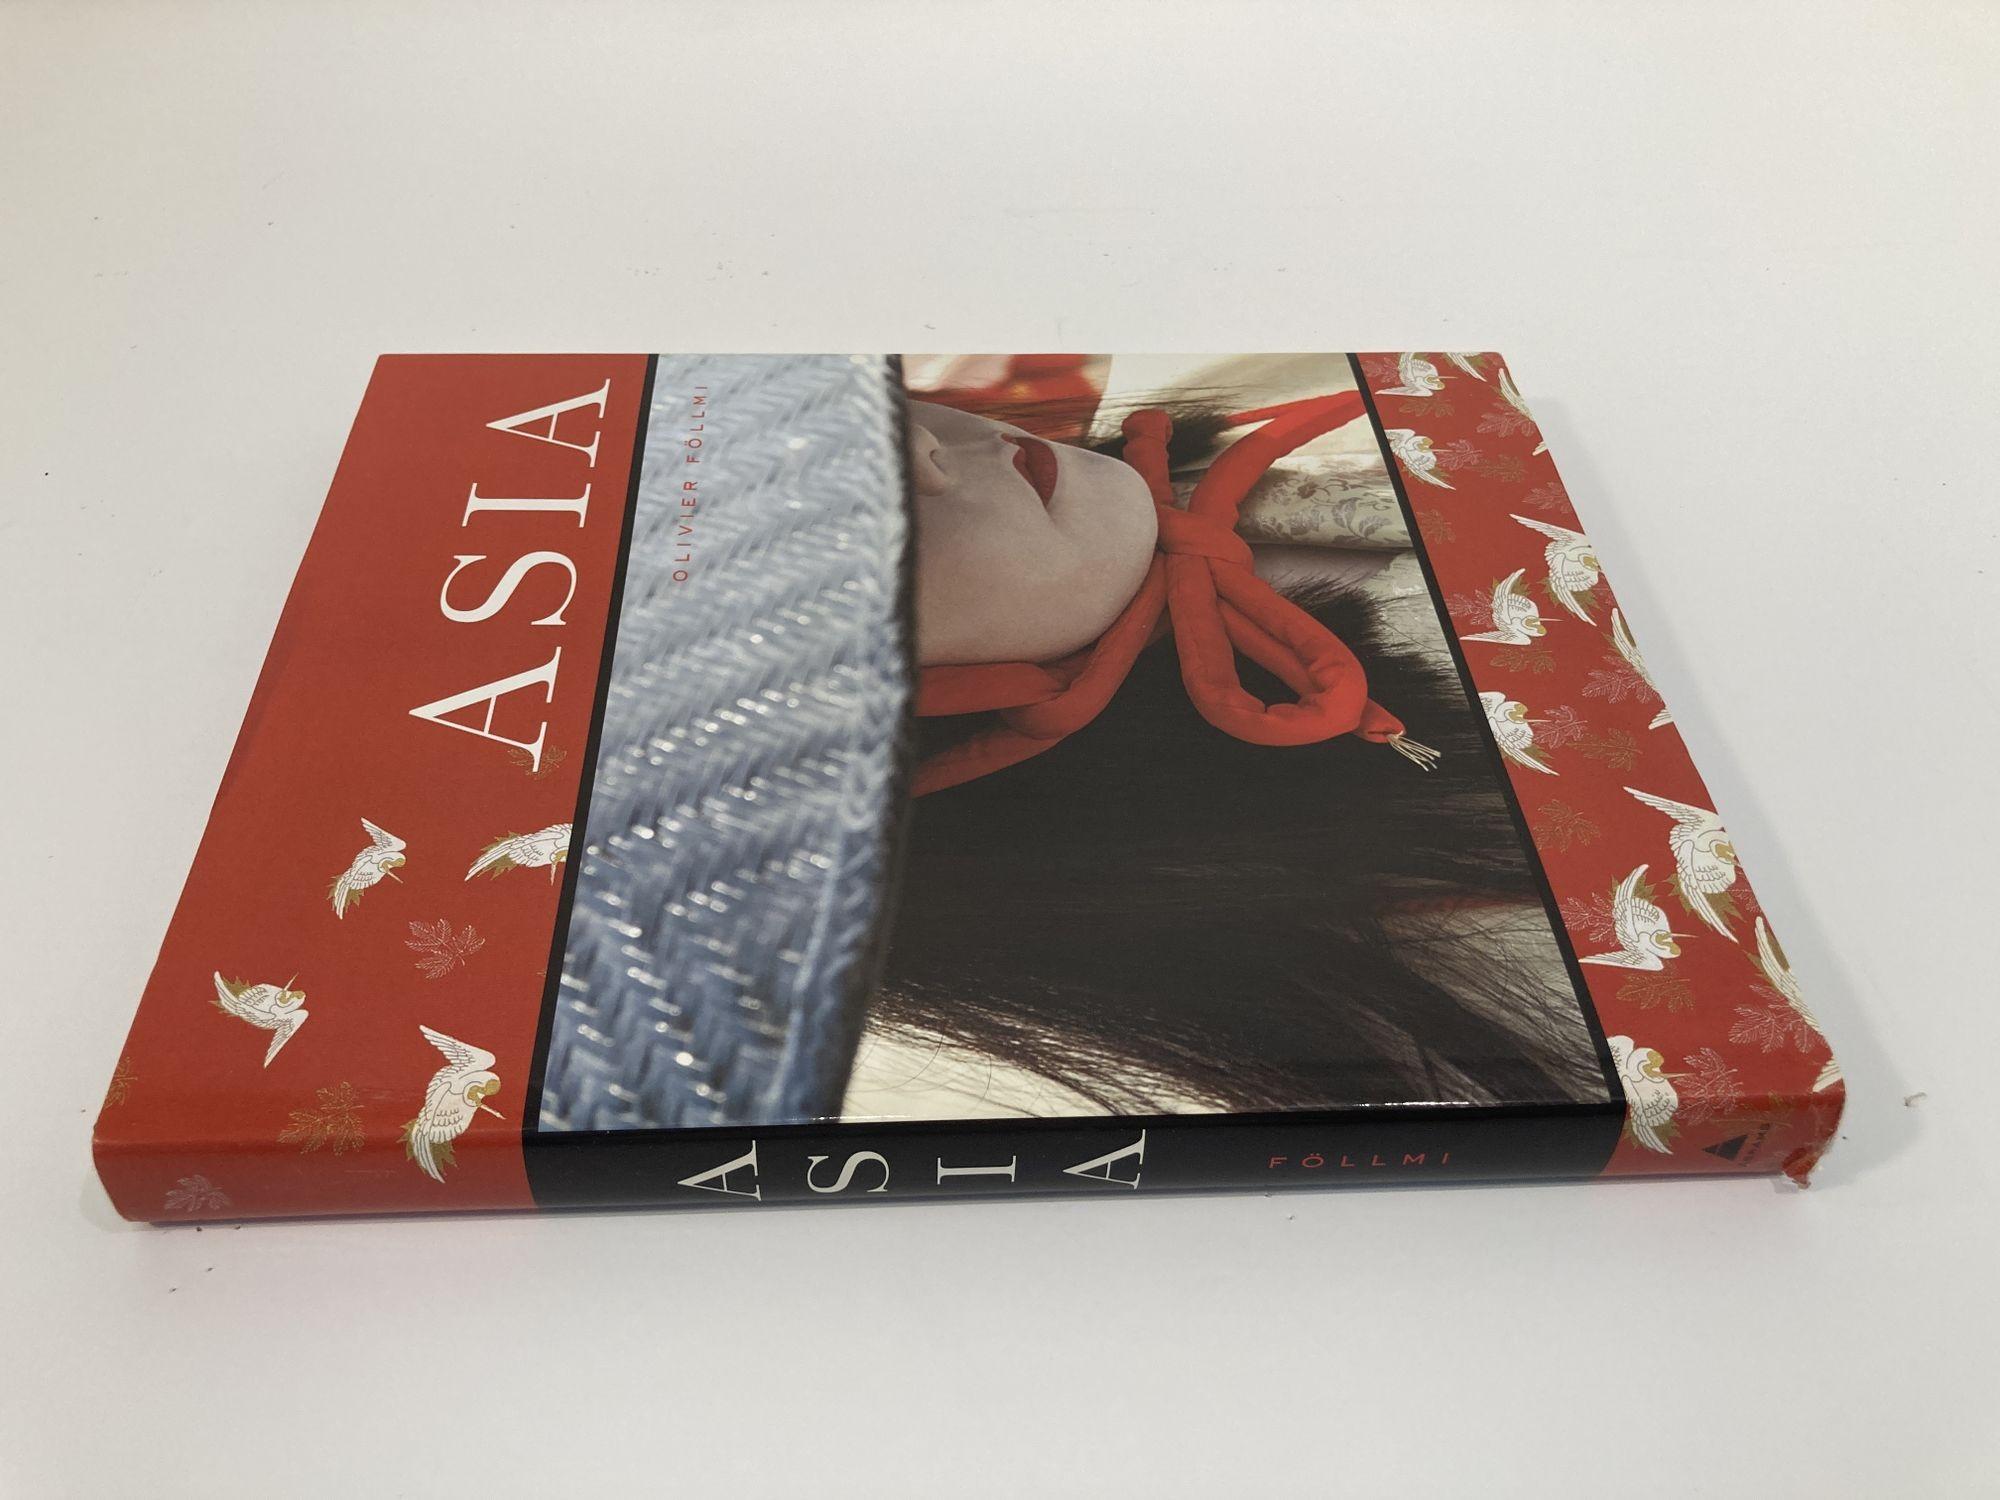 ASIA by Olivier Follmi Large Hardcover Book.
Very large format, heavy coffee table book, beautiful.
Inspired by the beauty of distant countries, Asia celebrates the depth and grandeur of the Far East. The fourth volume in Abrams' album-size